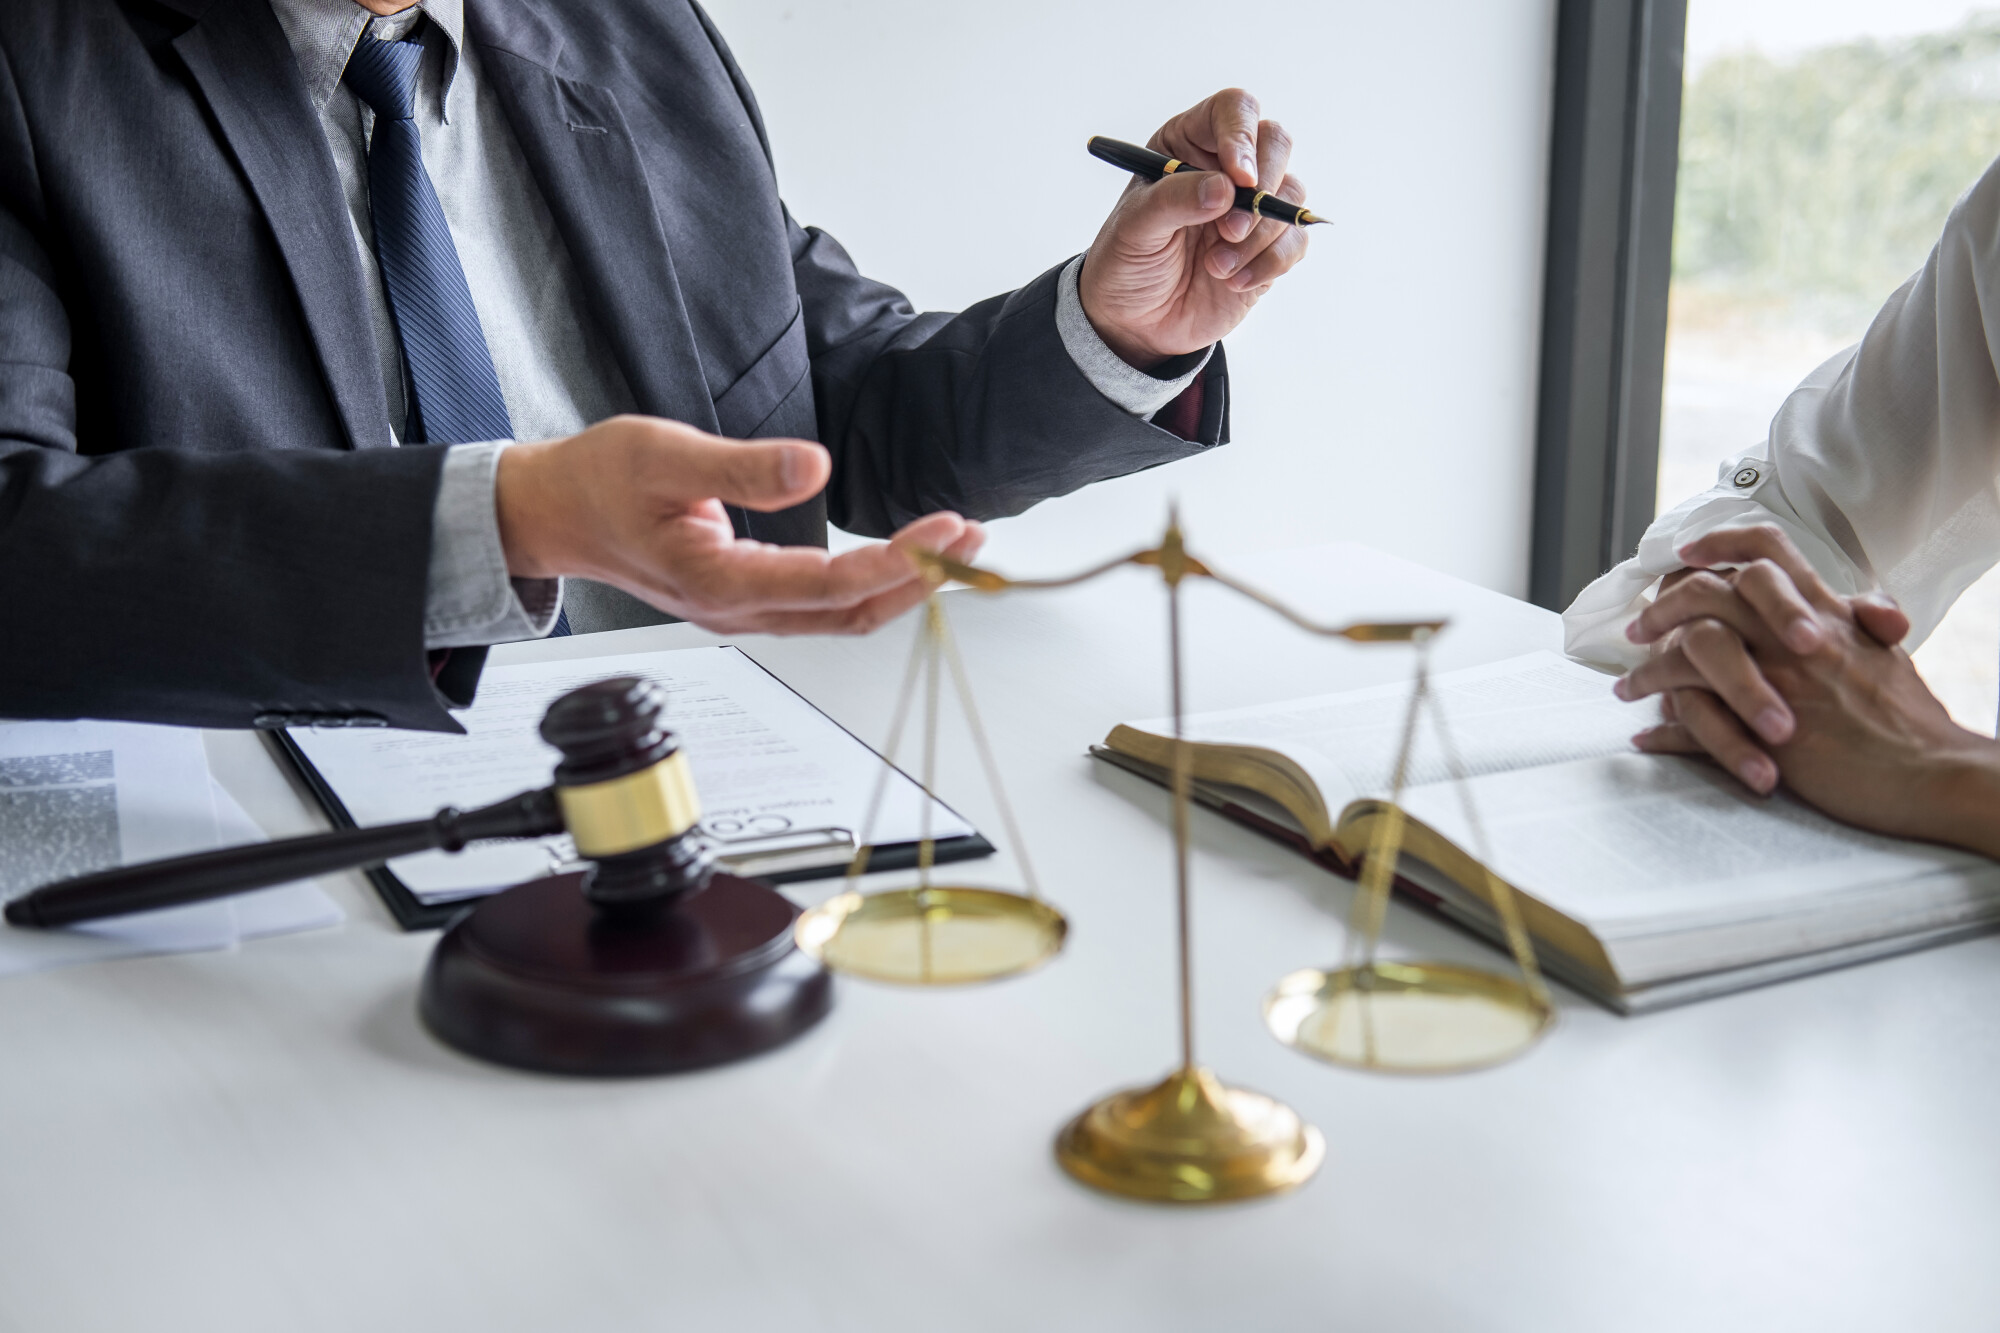 Do you want to know what different attorneys do? Then, read this article to discover the types of attorneys you need to know!